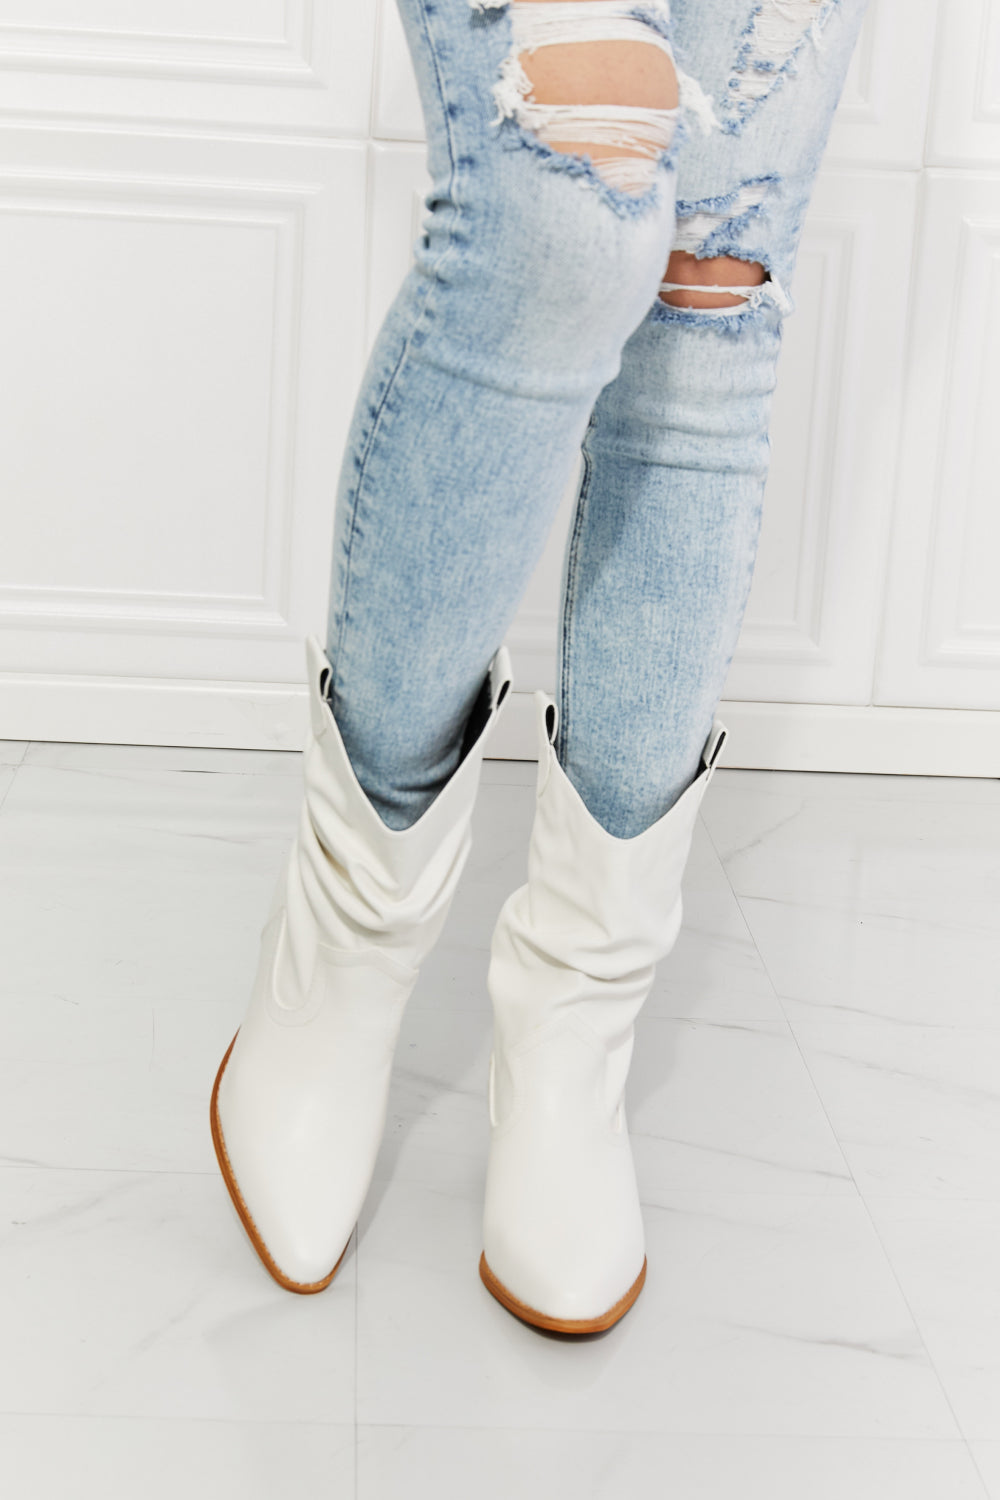 MMShoes Better in Texas Scrunch Cowboy Boots in White - Tigbul's Fashion